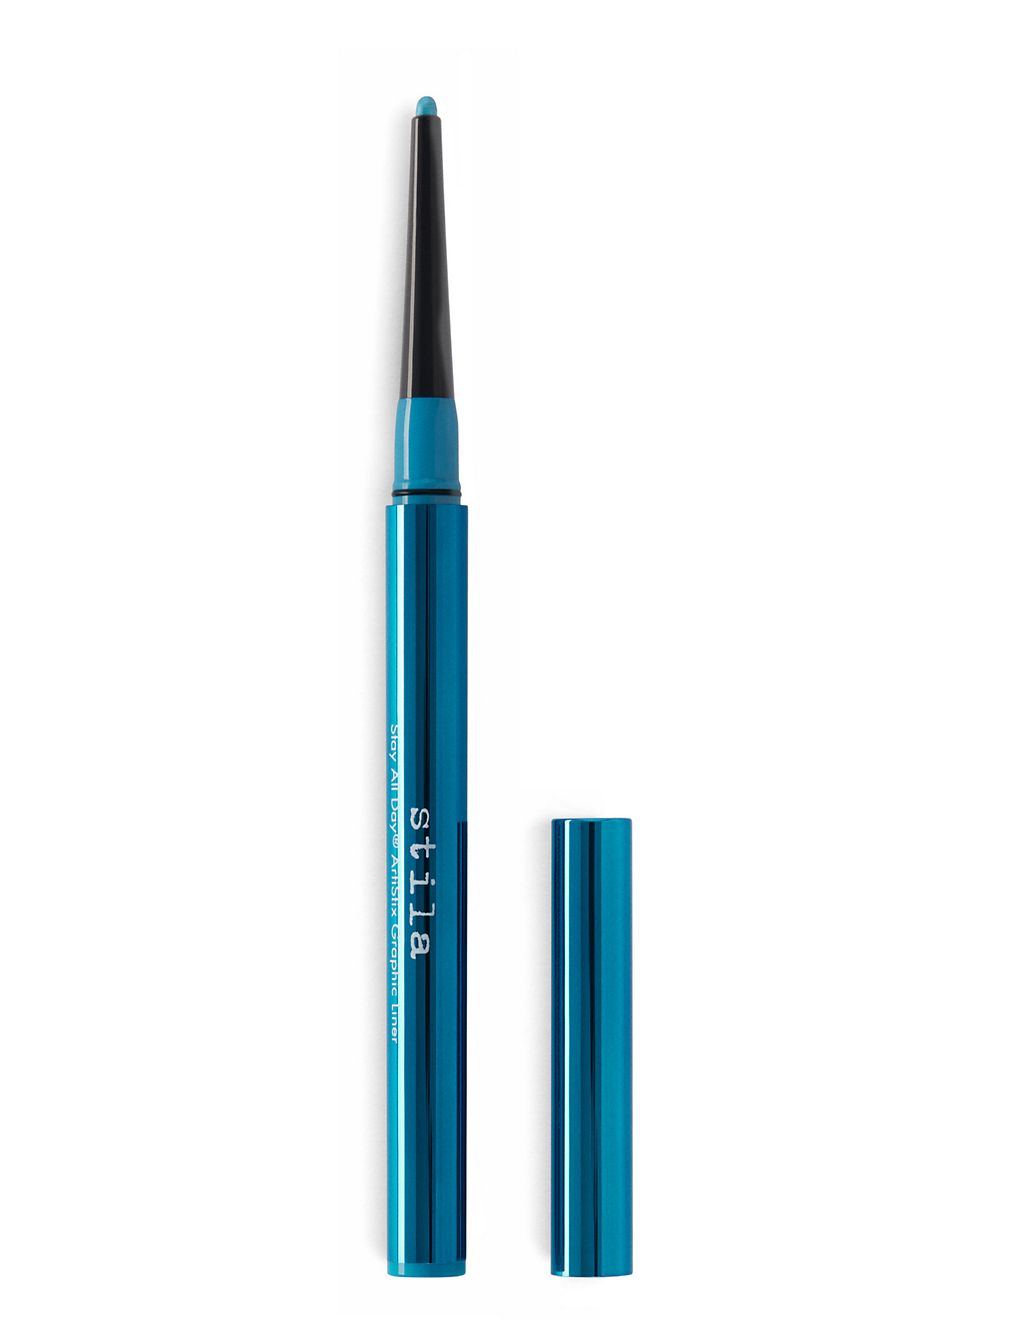 Stay All Day® ArtiStix Graphic Liner 0.2g 1 of 6